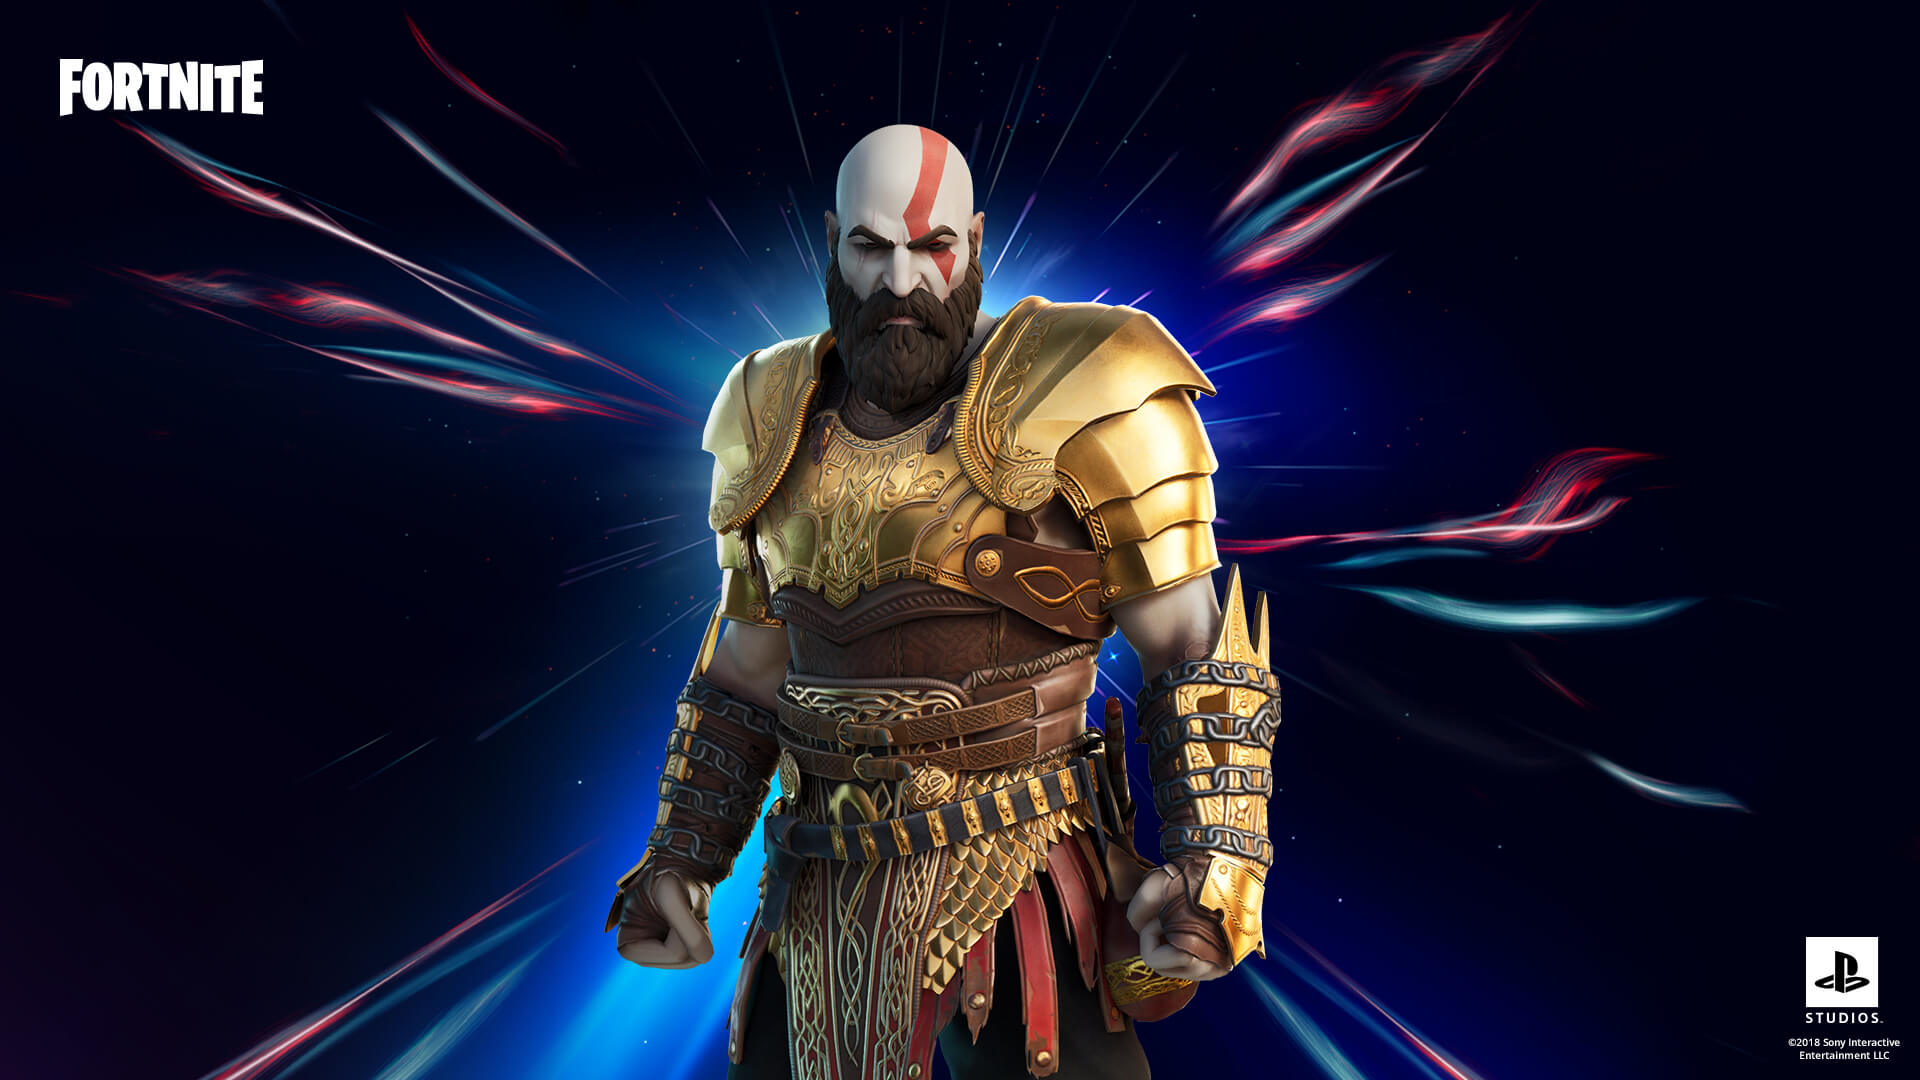 dxqifomnjk_fortnite-kratos-armored-style-outfit-1920x1080-693045924.jpg